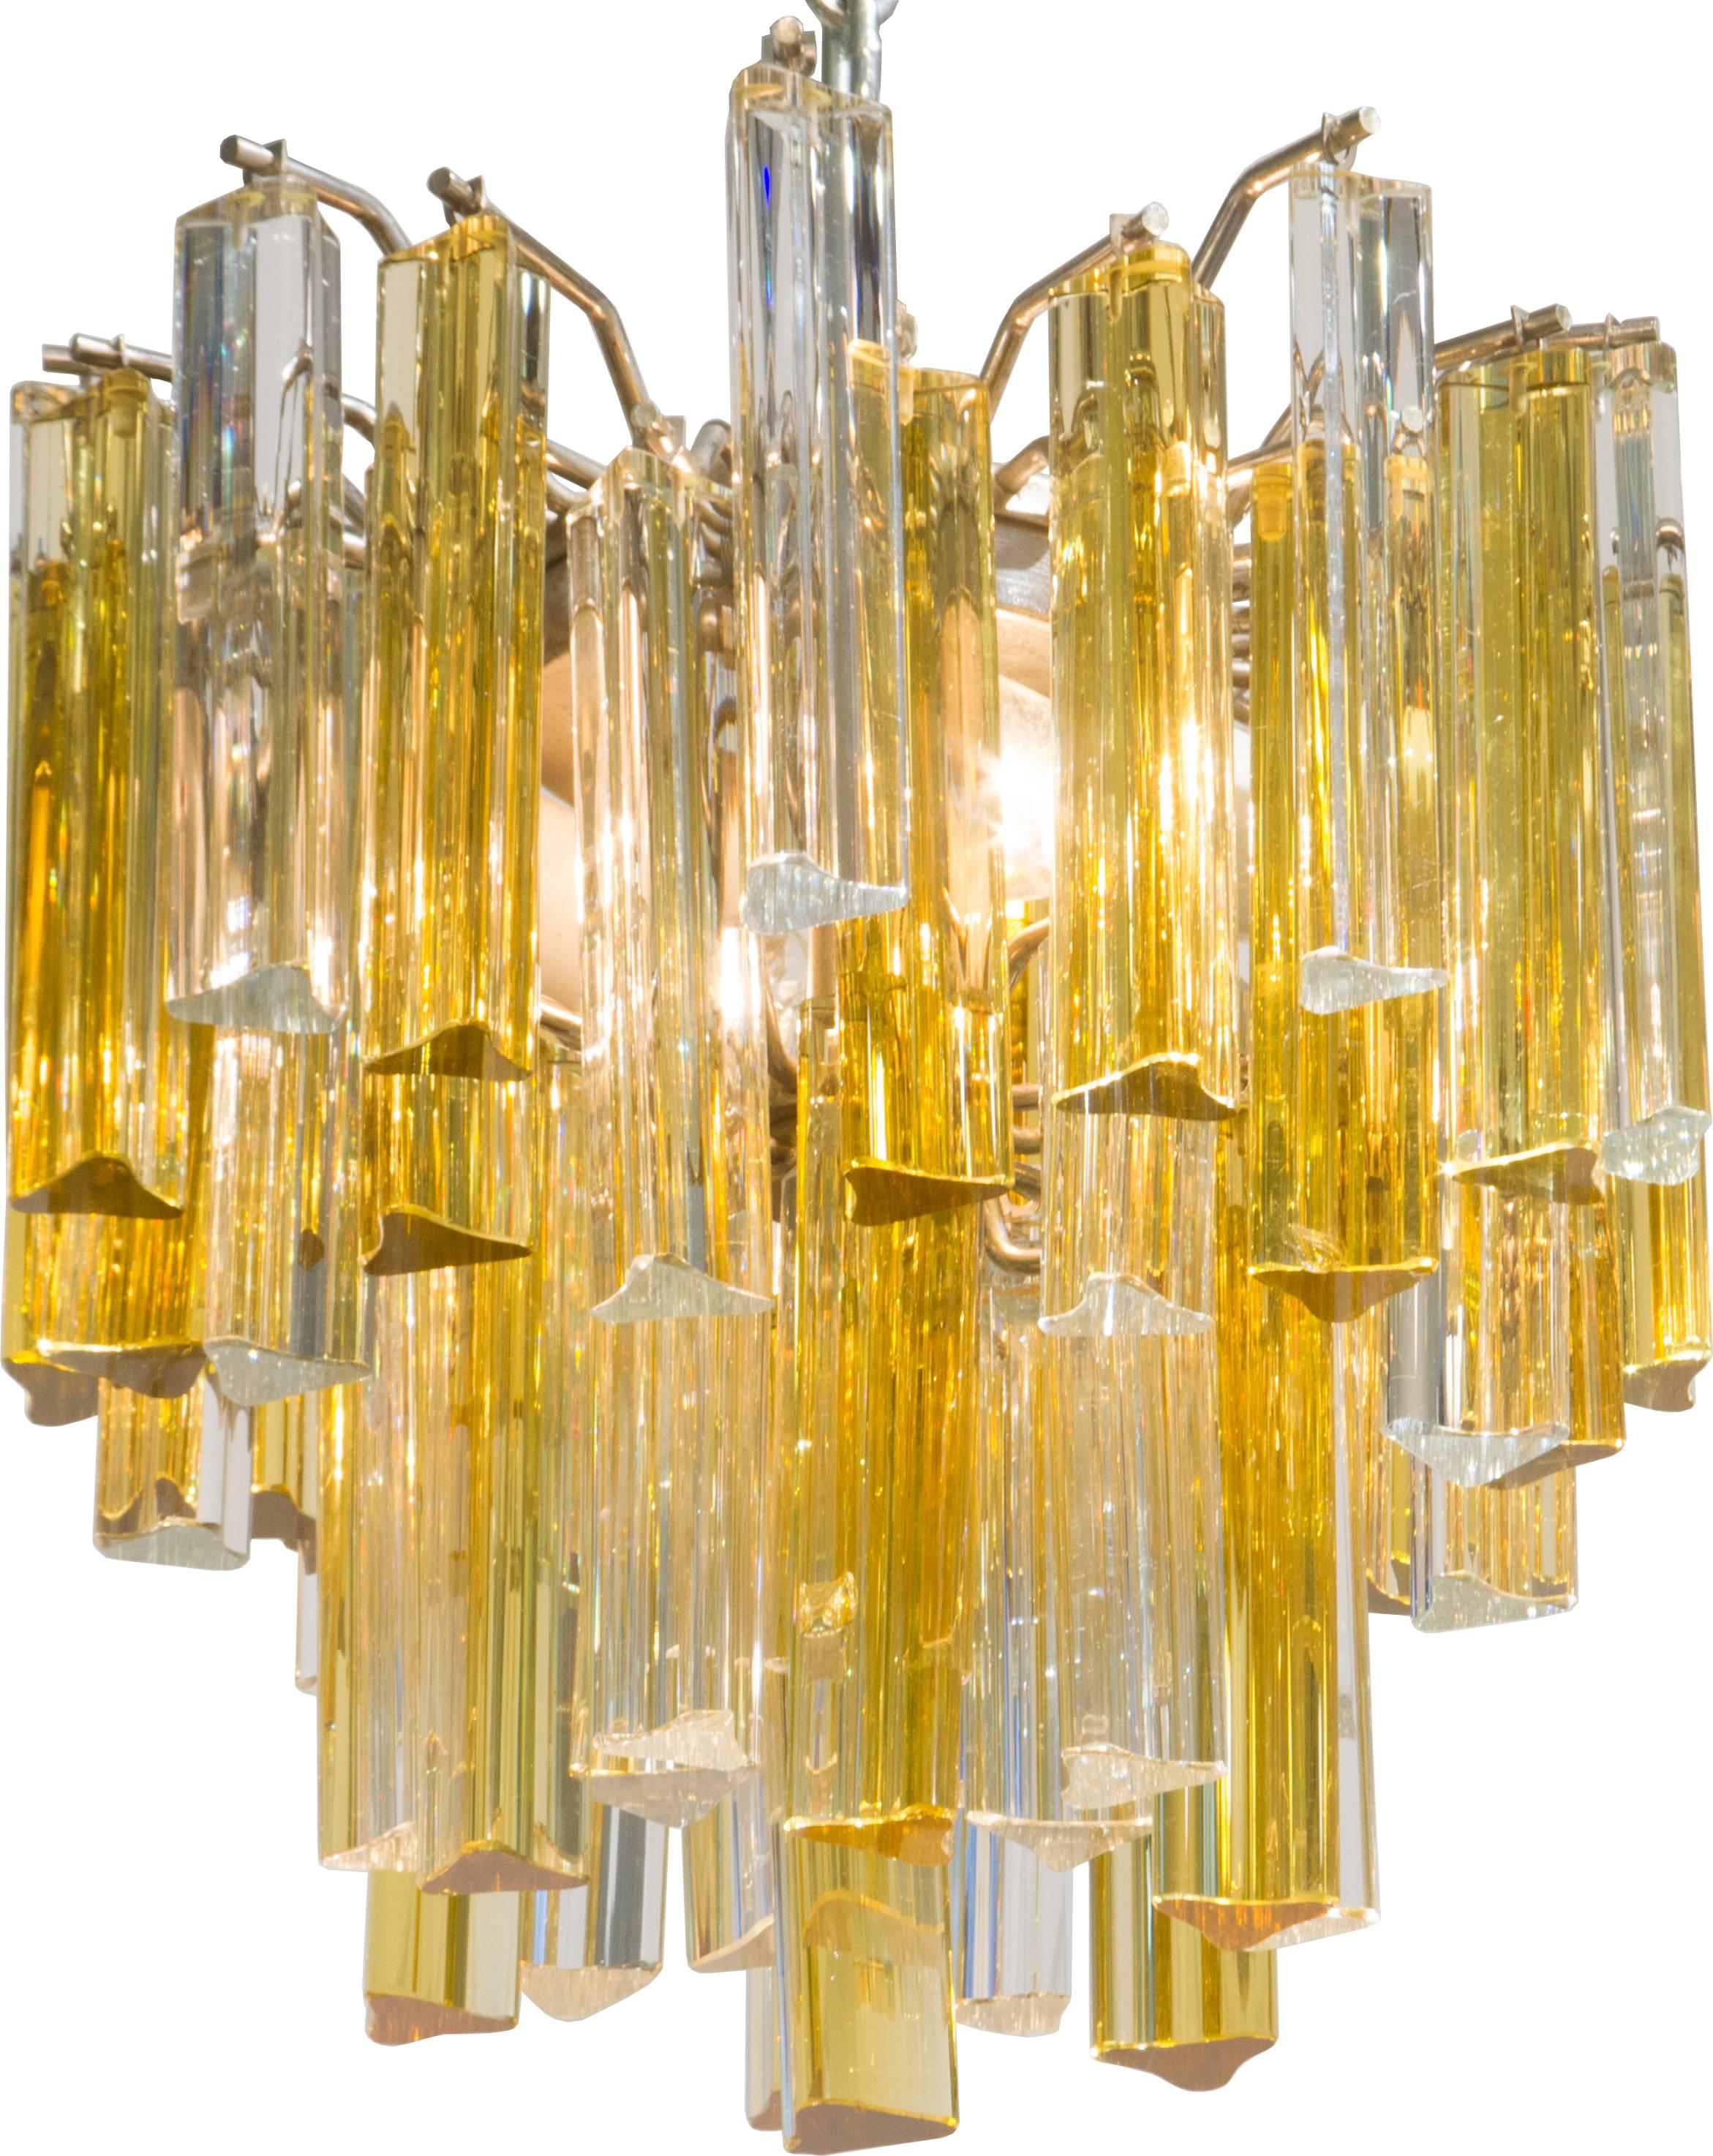 This is an interesting Camer fixture accented with rare yellow colored prisms.